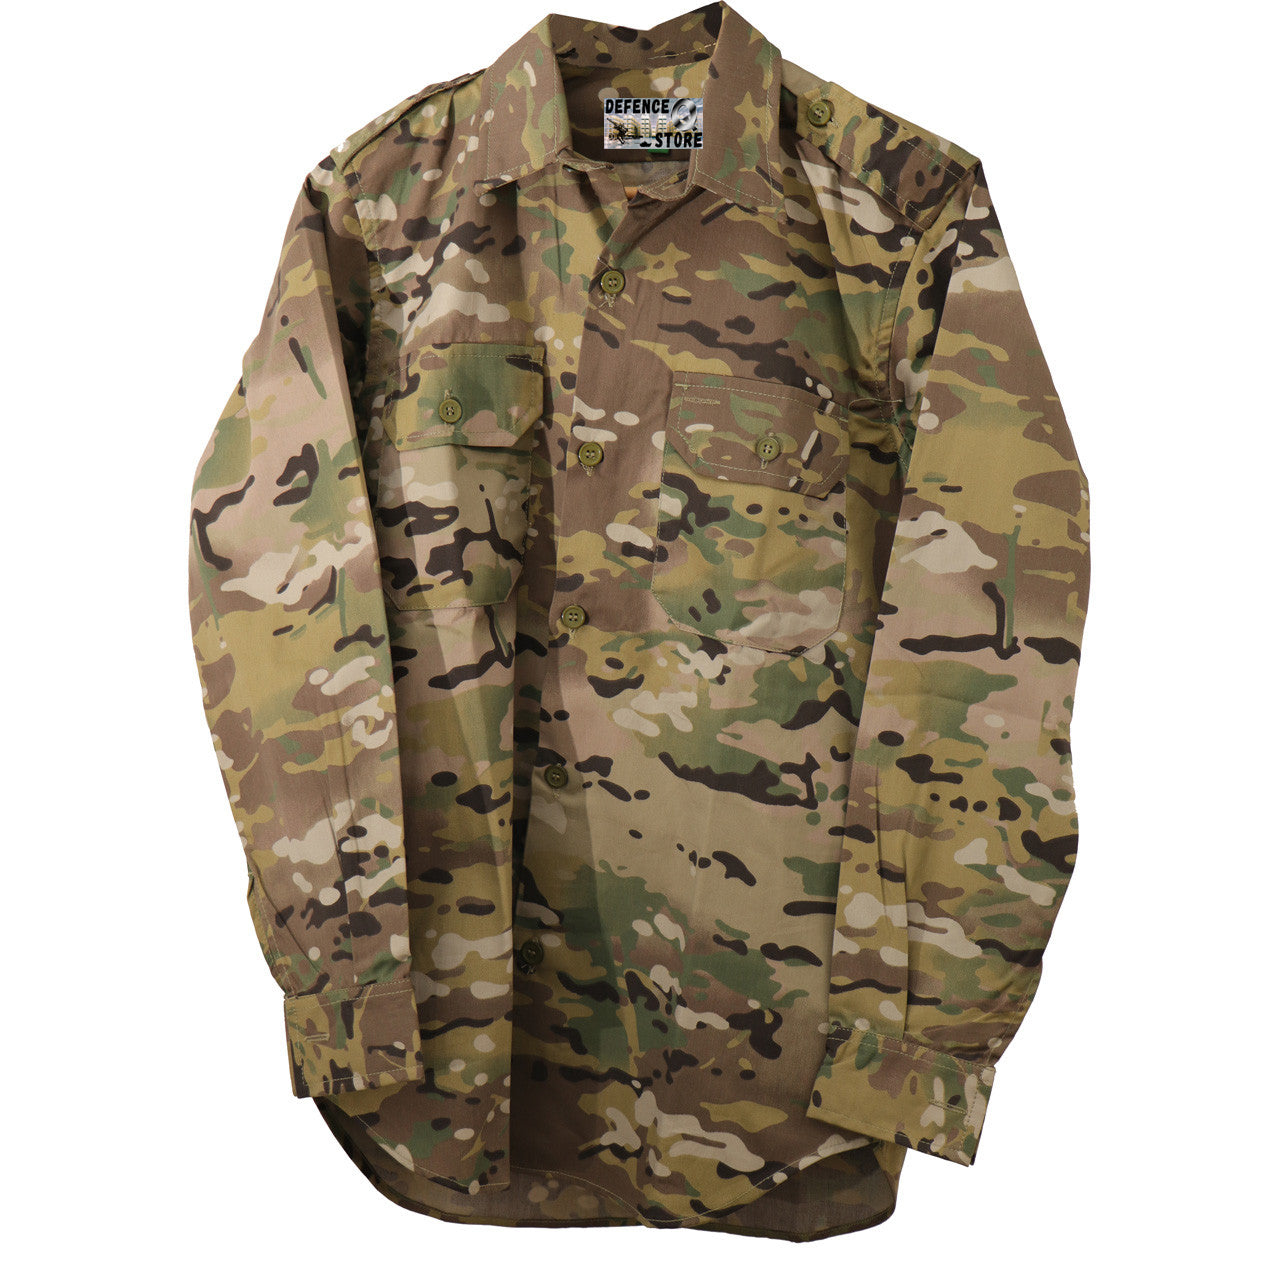 Defence Q Store brings you this high quality long sleeve t-shirt will be a great edition to your field wear  Specifications:      Material: 52% Polyester/48% Cotton     Colour: Multicam     Size: S - 3XL www.defenceqstore.com.au